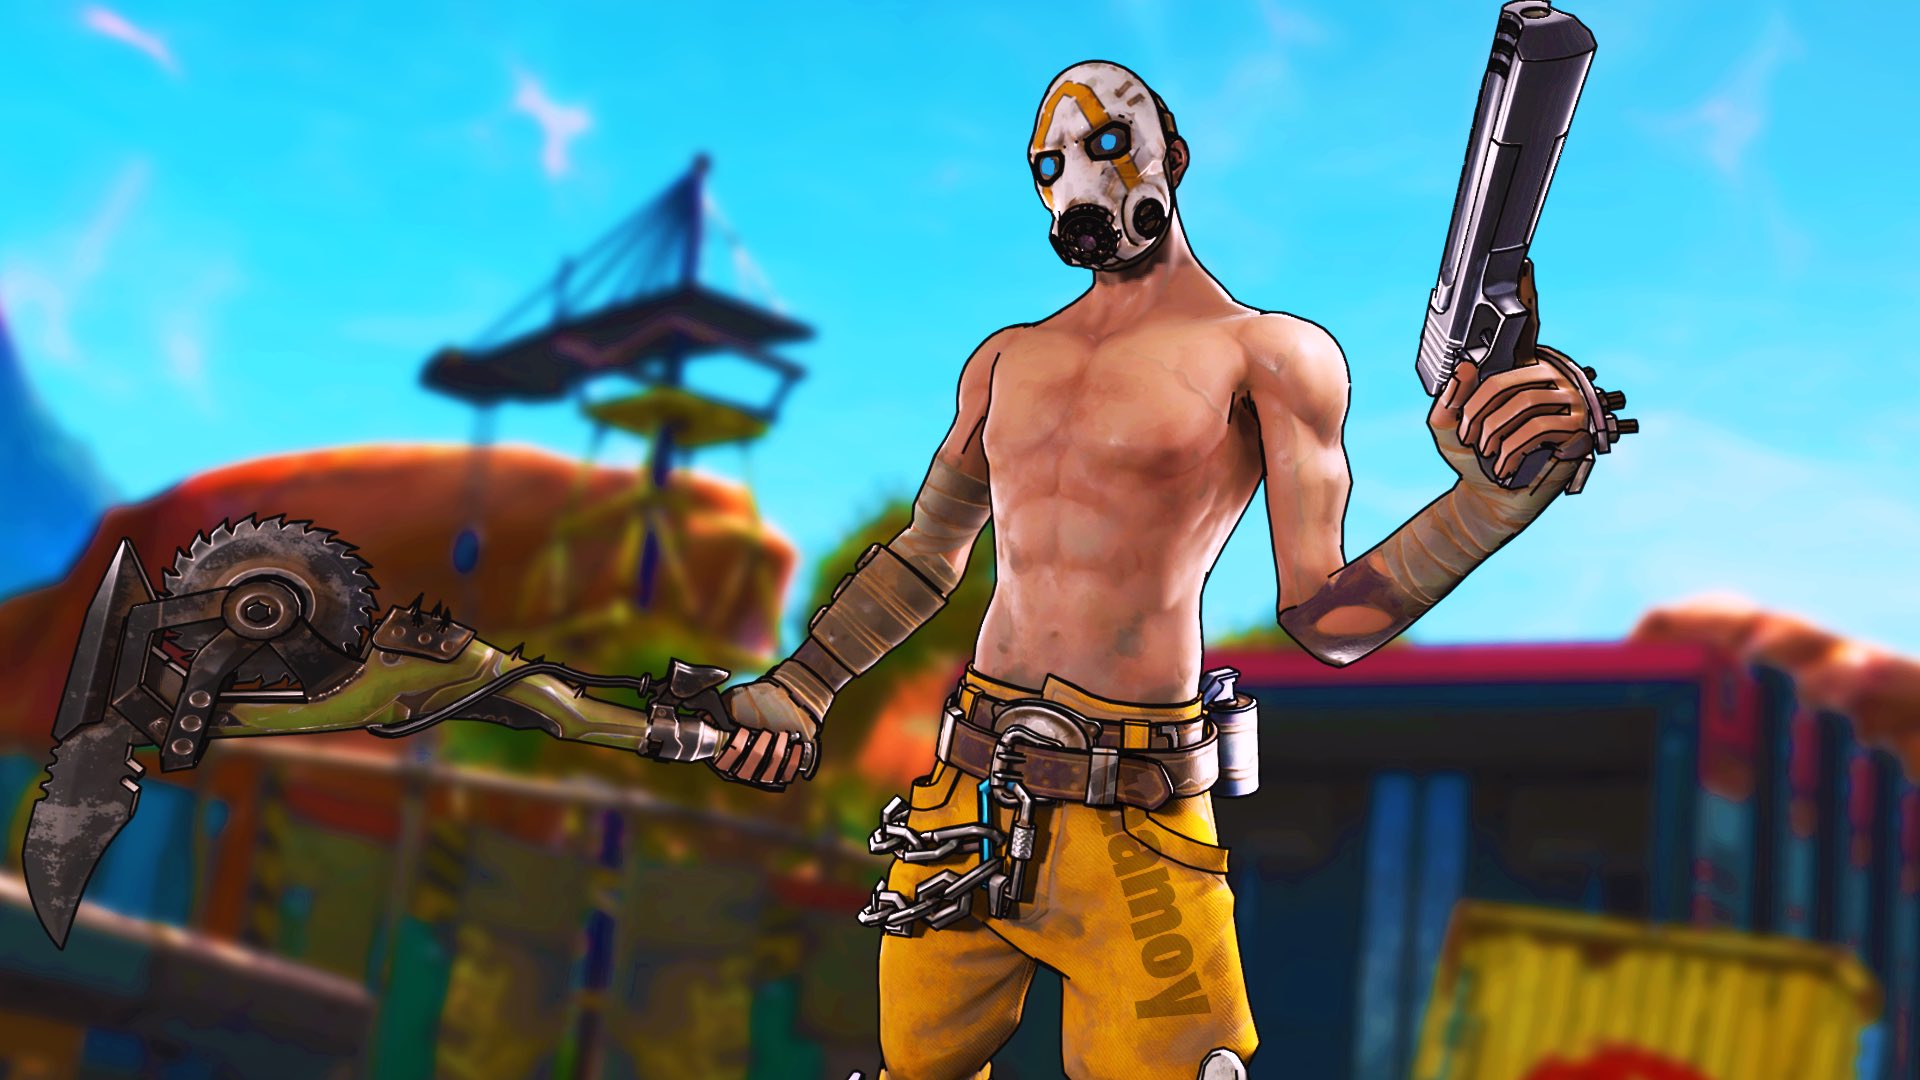 taamoy on Twitter: "Fortnite x Borderlands💥 ♥️+♻️ are greatly appreciated! #Fortnite #Borderlands #FORTNITEXBORDERLANDS https://t.co/Olz1ZGOqVW" / Twitter